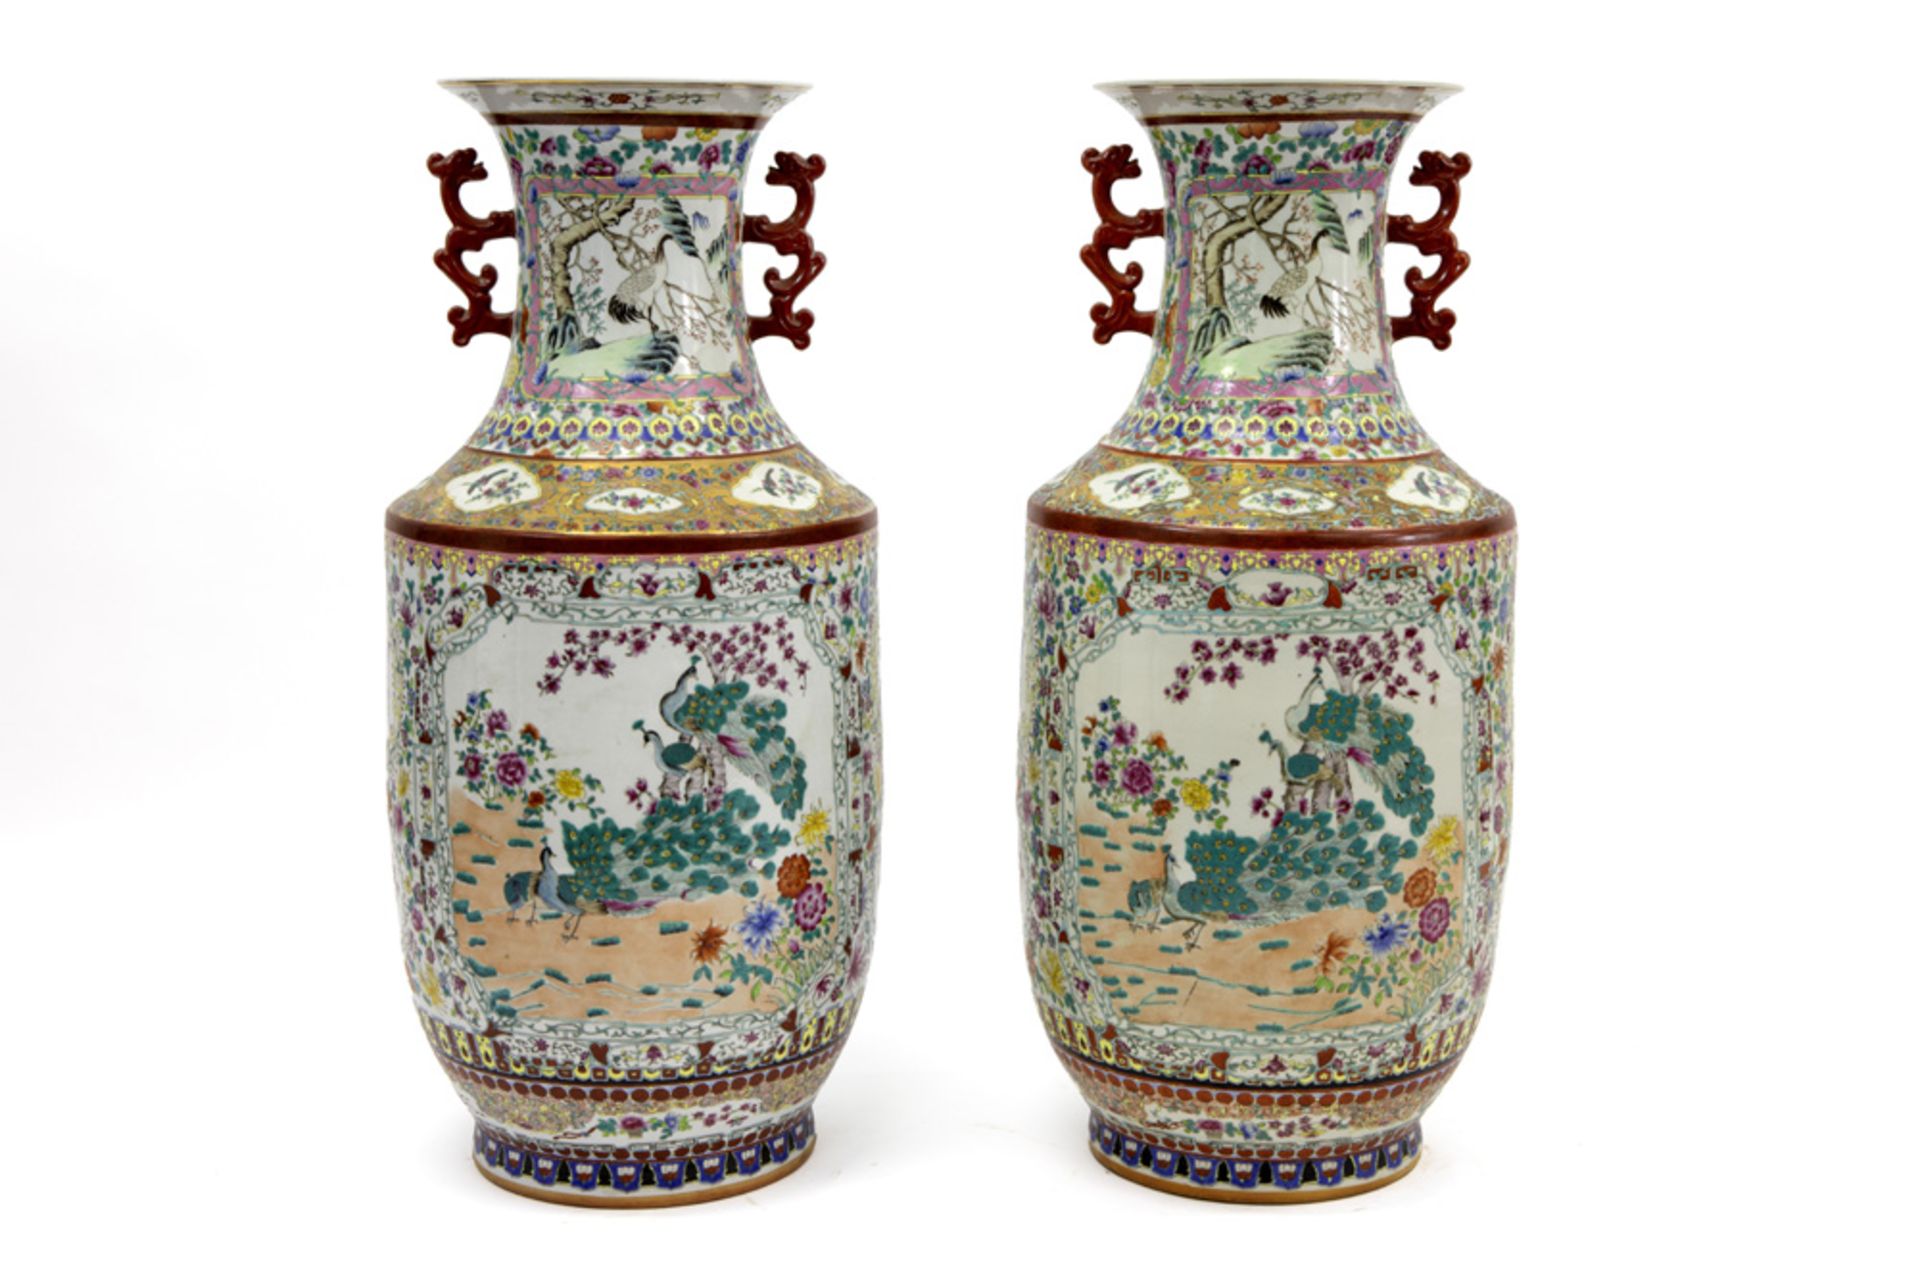 pair of 20th Cent. Chinese vases in porcelain with a polychrome decor with peacocks ||Paar 20ste